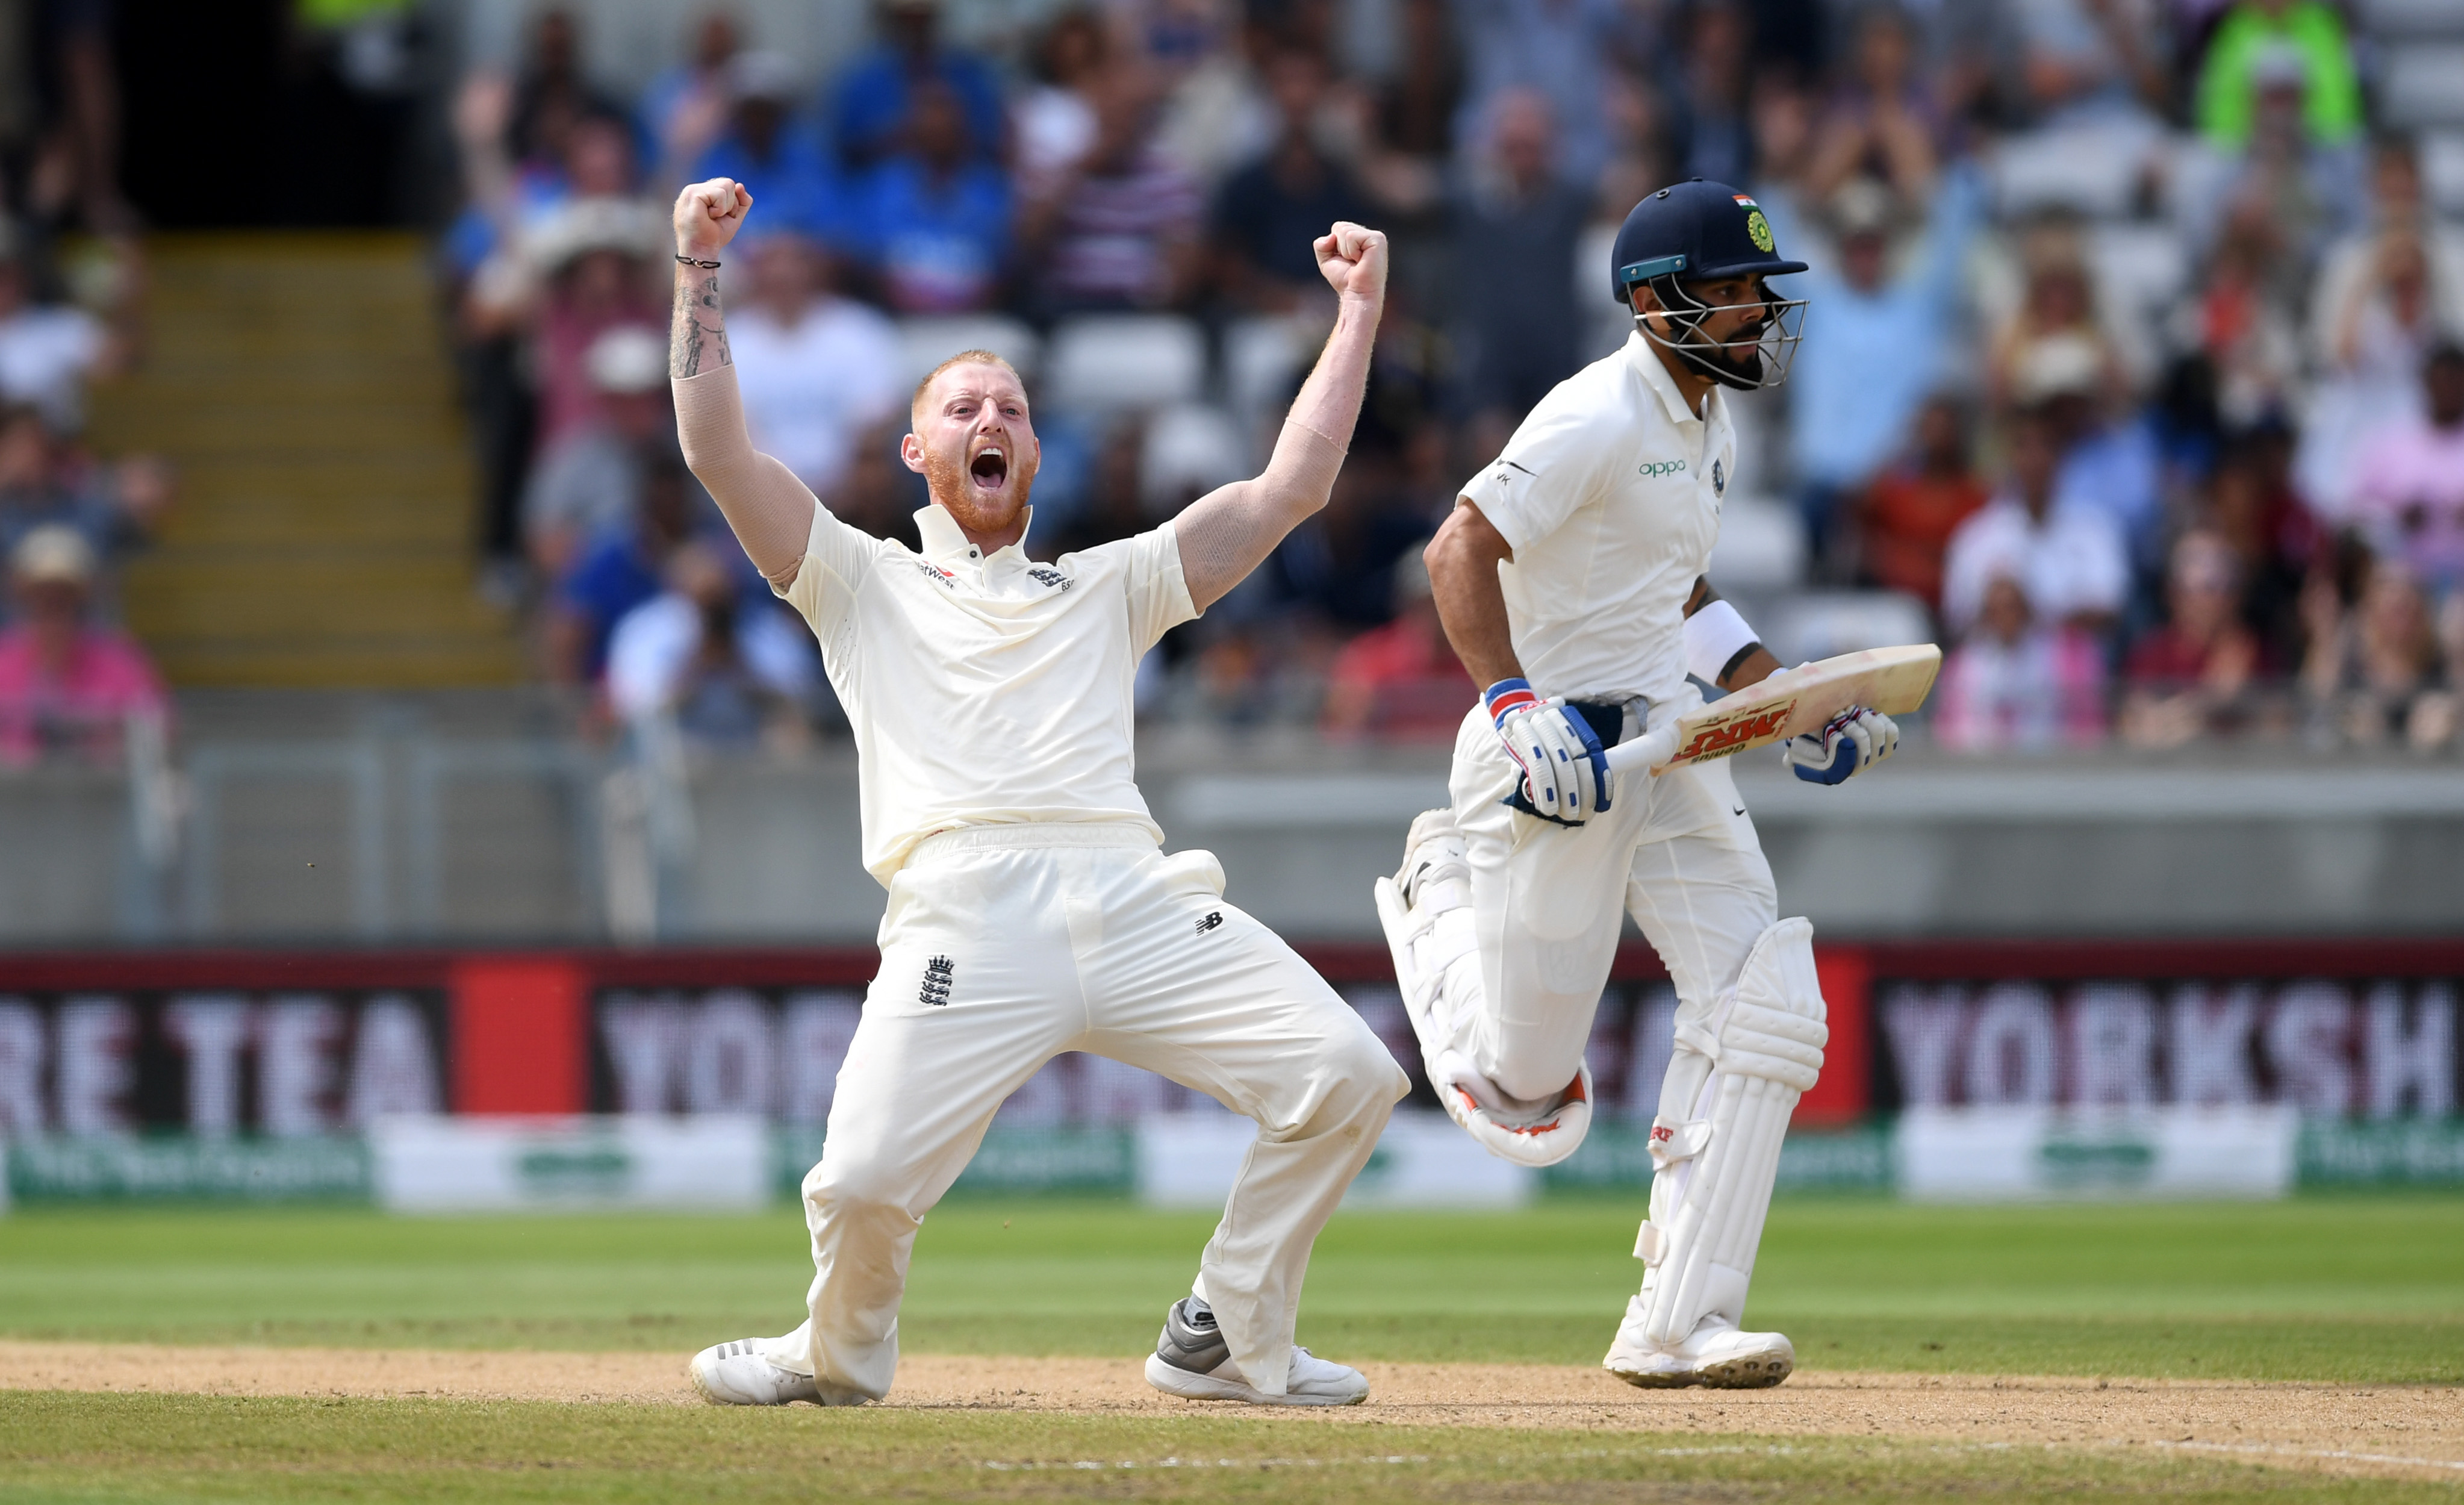 Ben Stokes clarifies his statement after people misconstrued his reply to Virat Kohli gesture